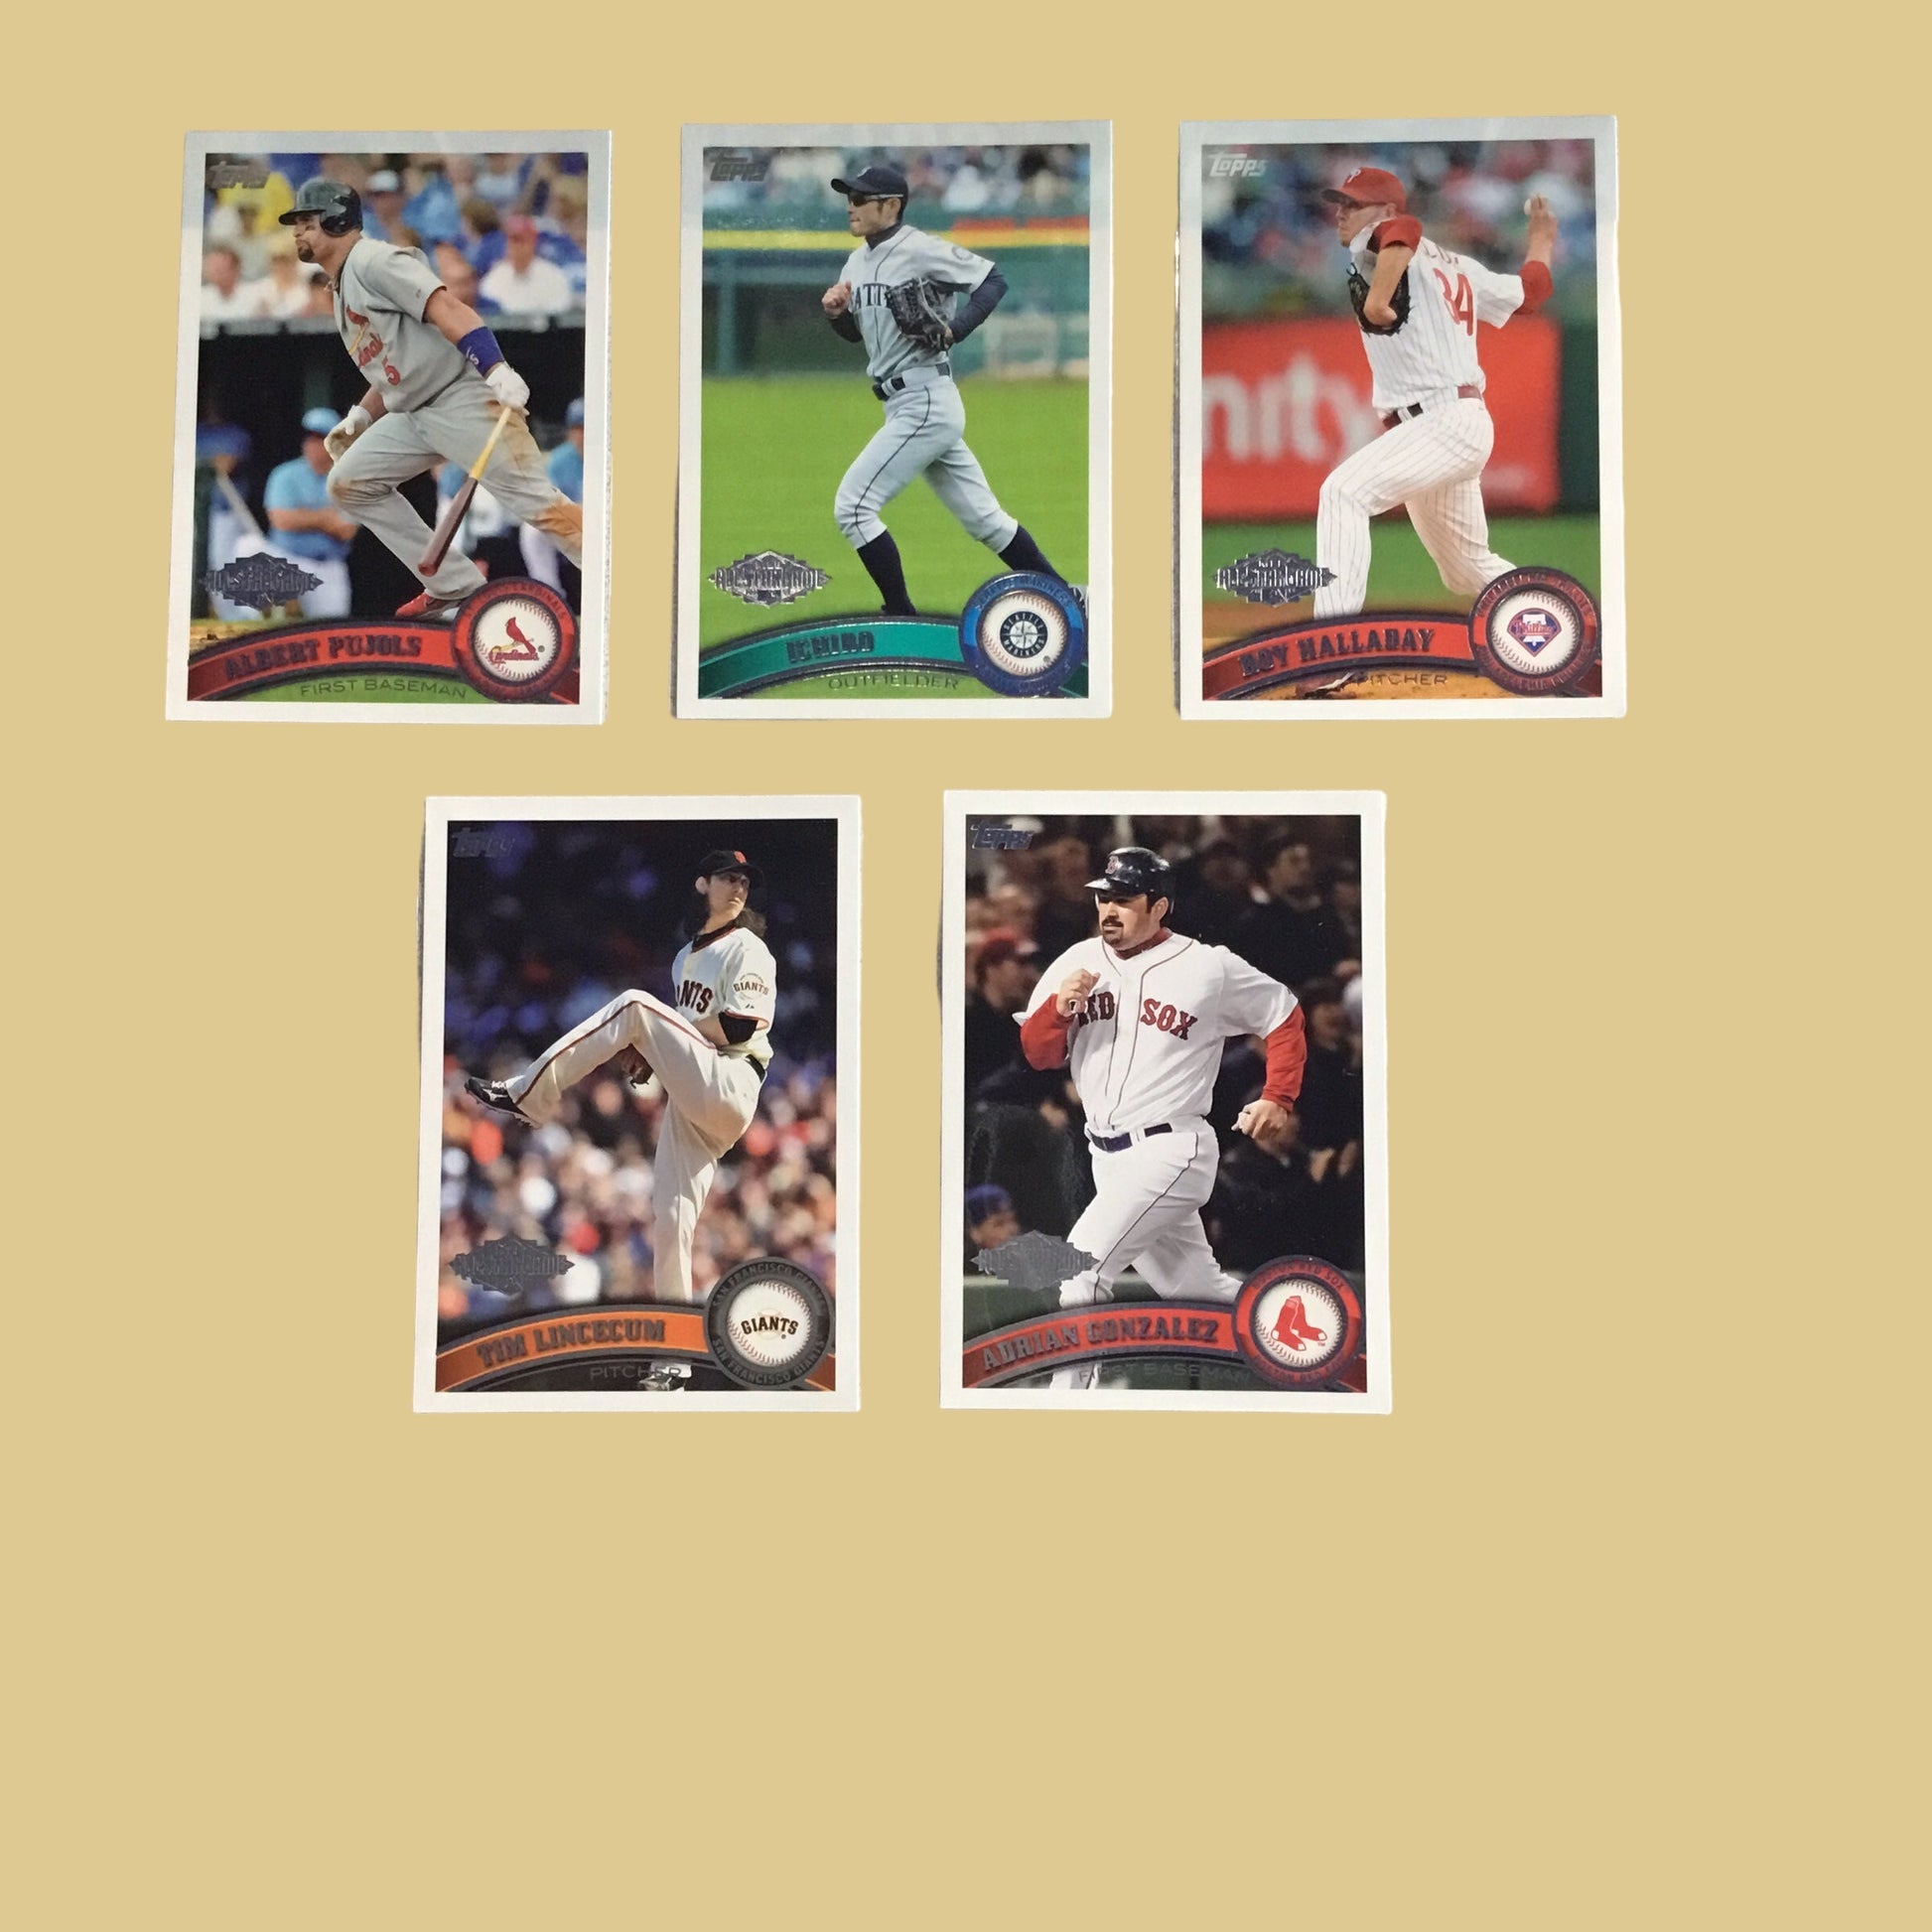 2011 Topps Baseball Complete 660 Card Factory Set Opend